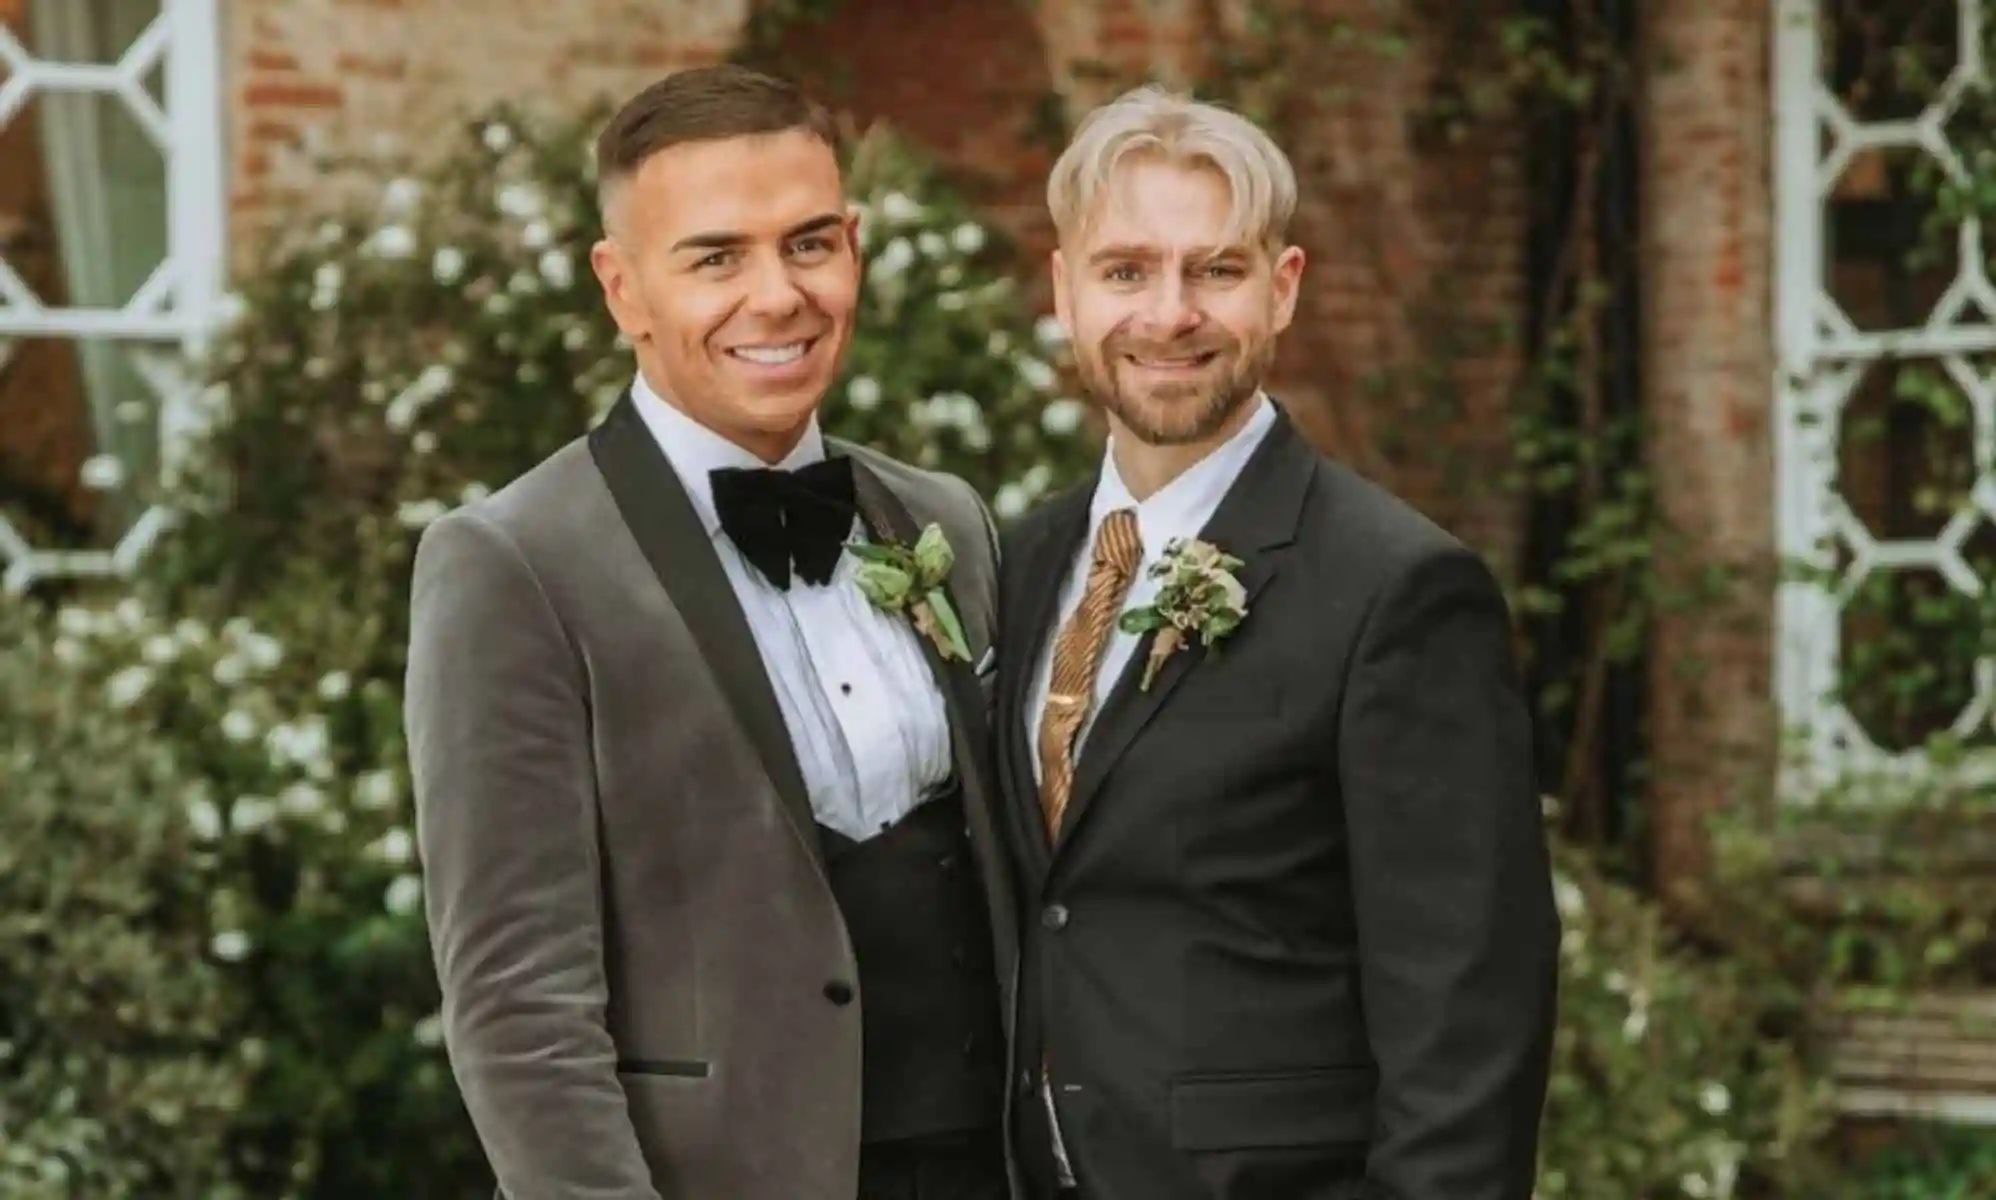 Married At First Sight UK same-sex couple hit trouble already